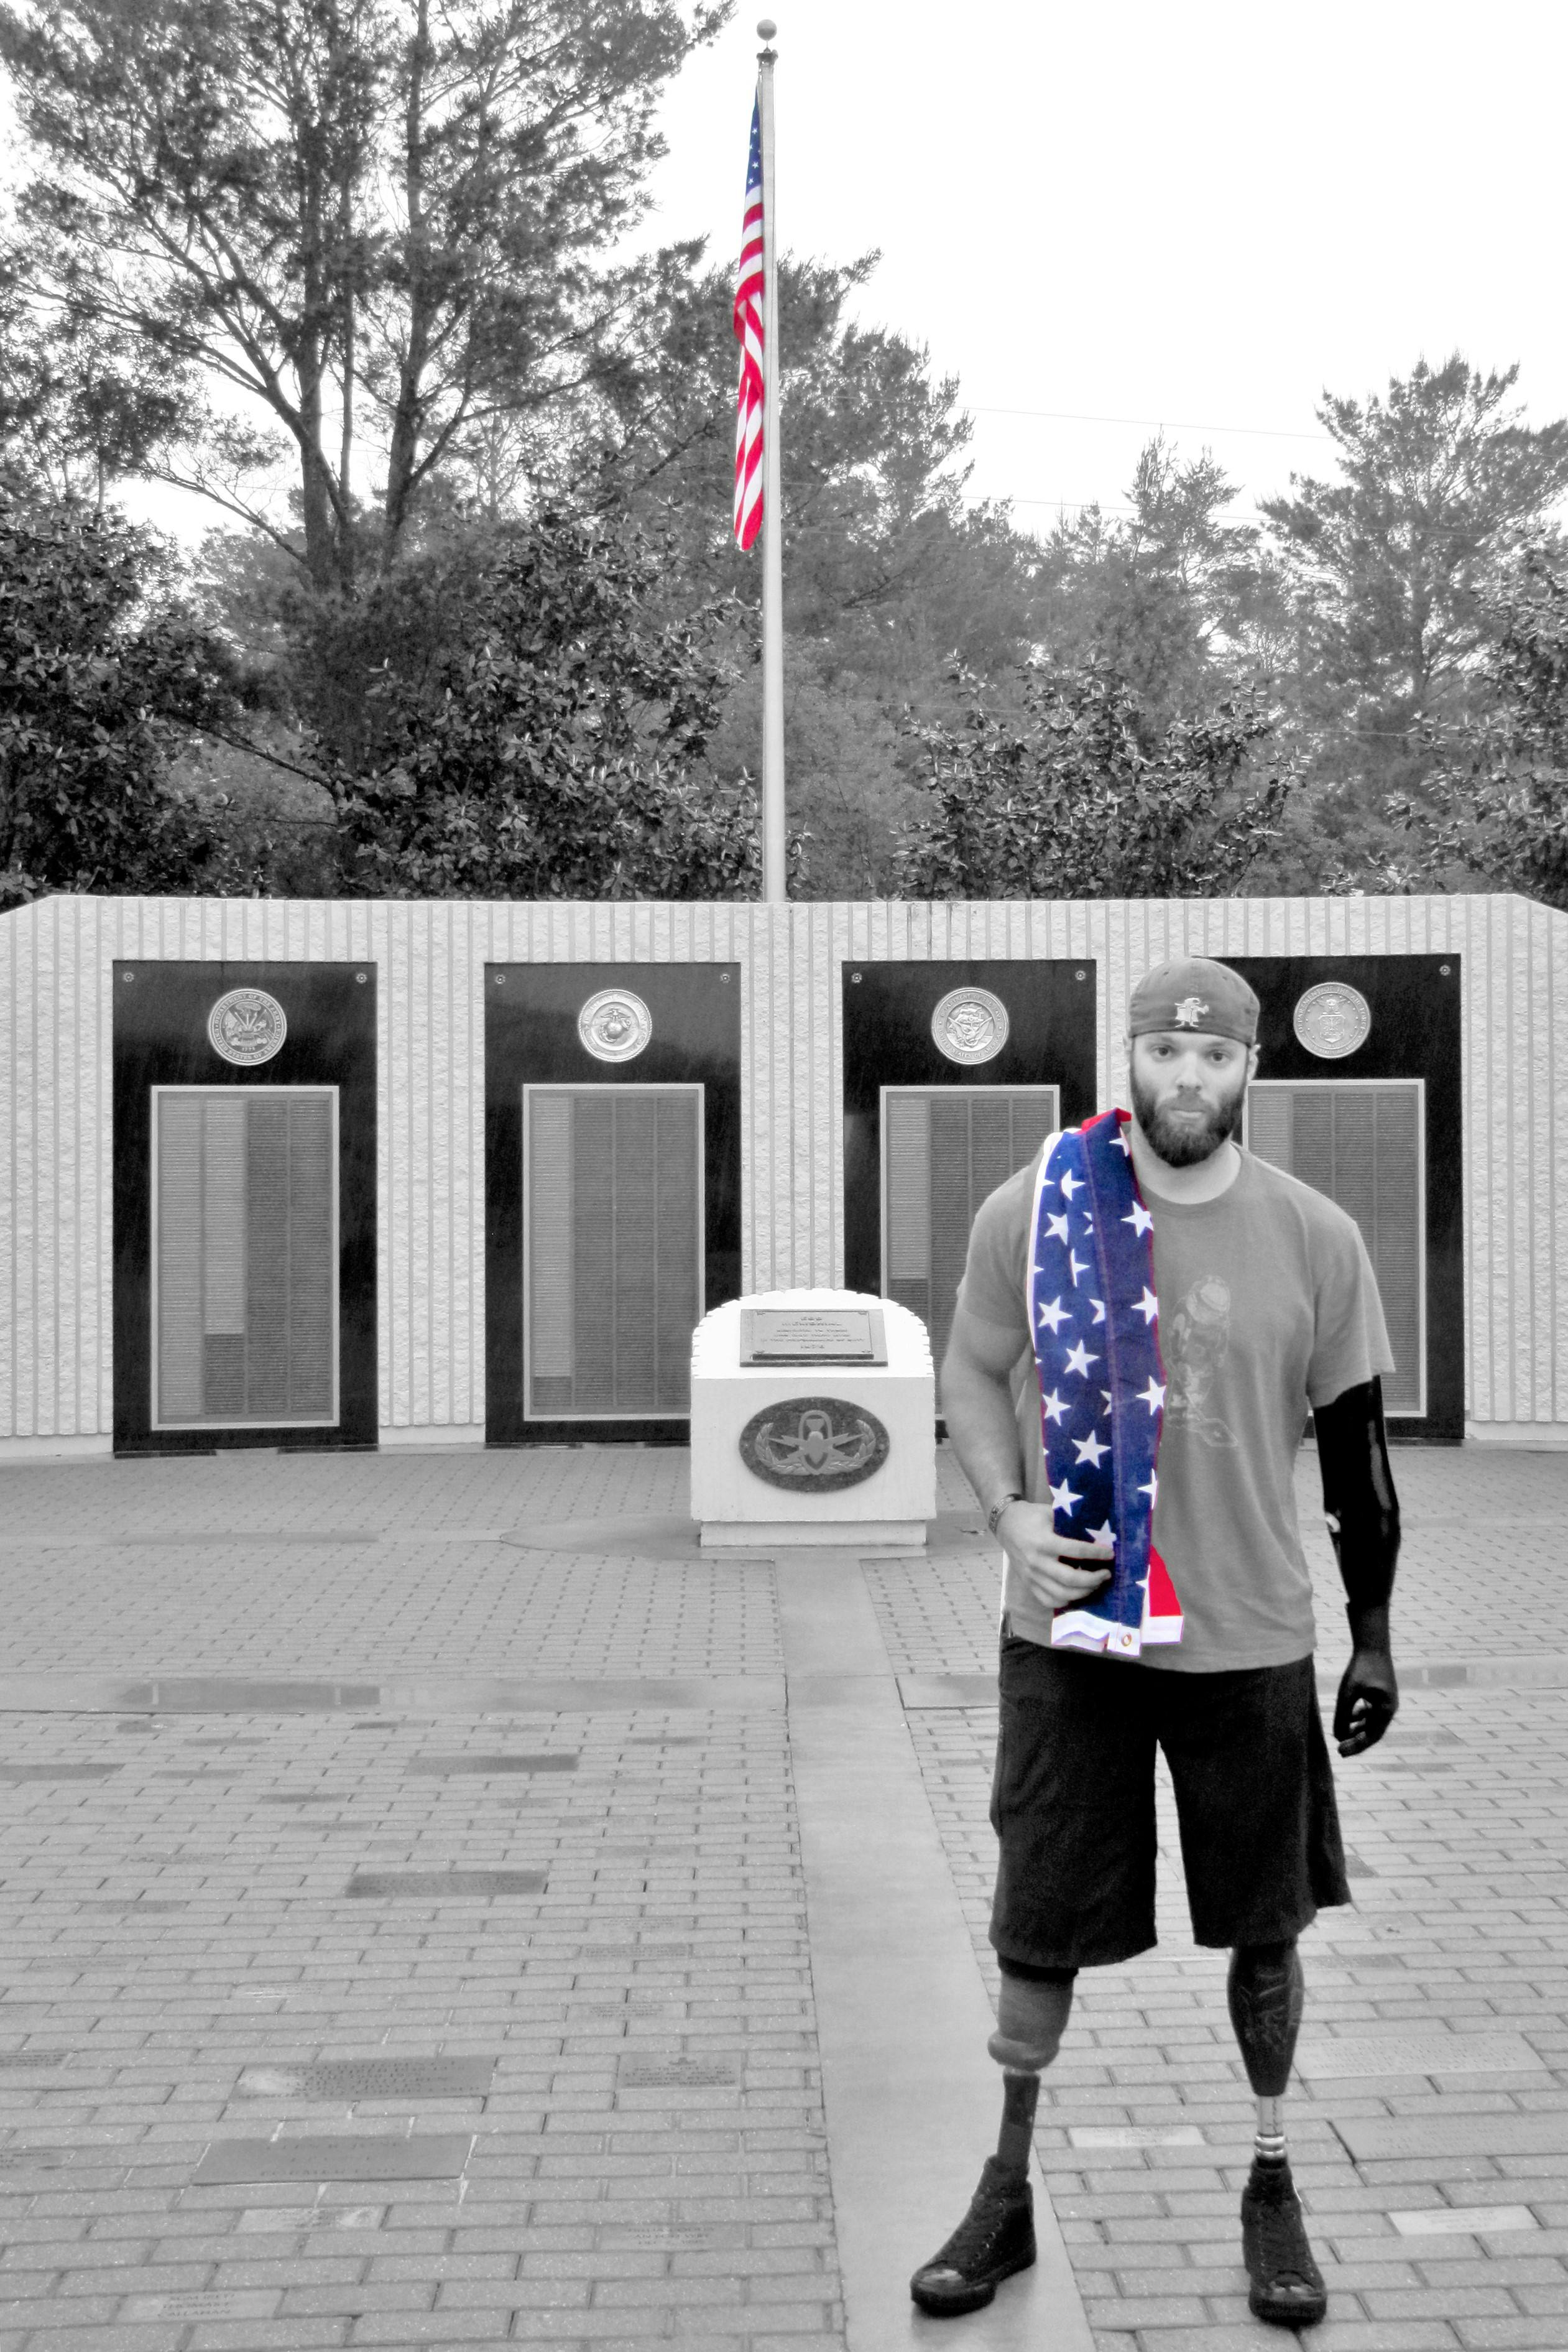 Andrew Bottrell holding the Stars & Stripes posing in front of a war memorial